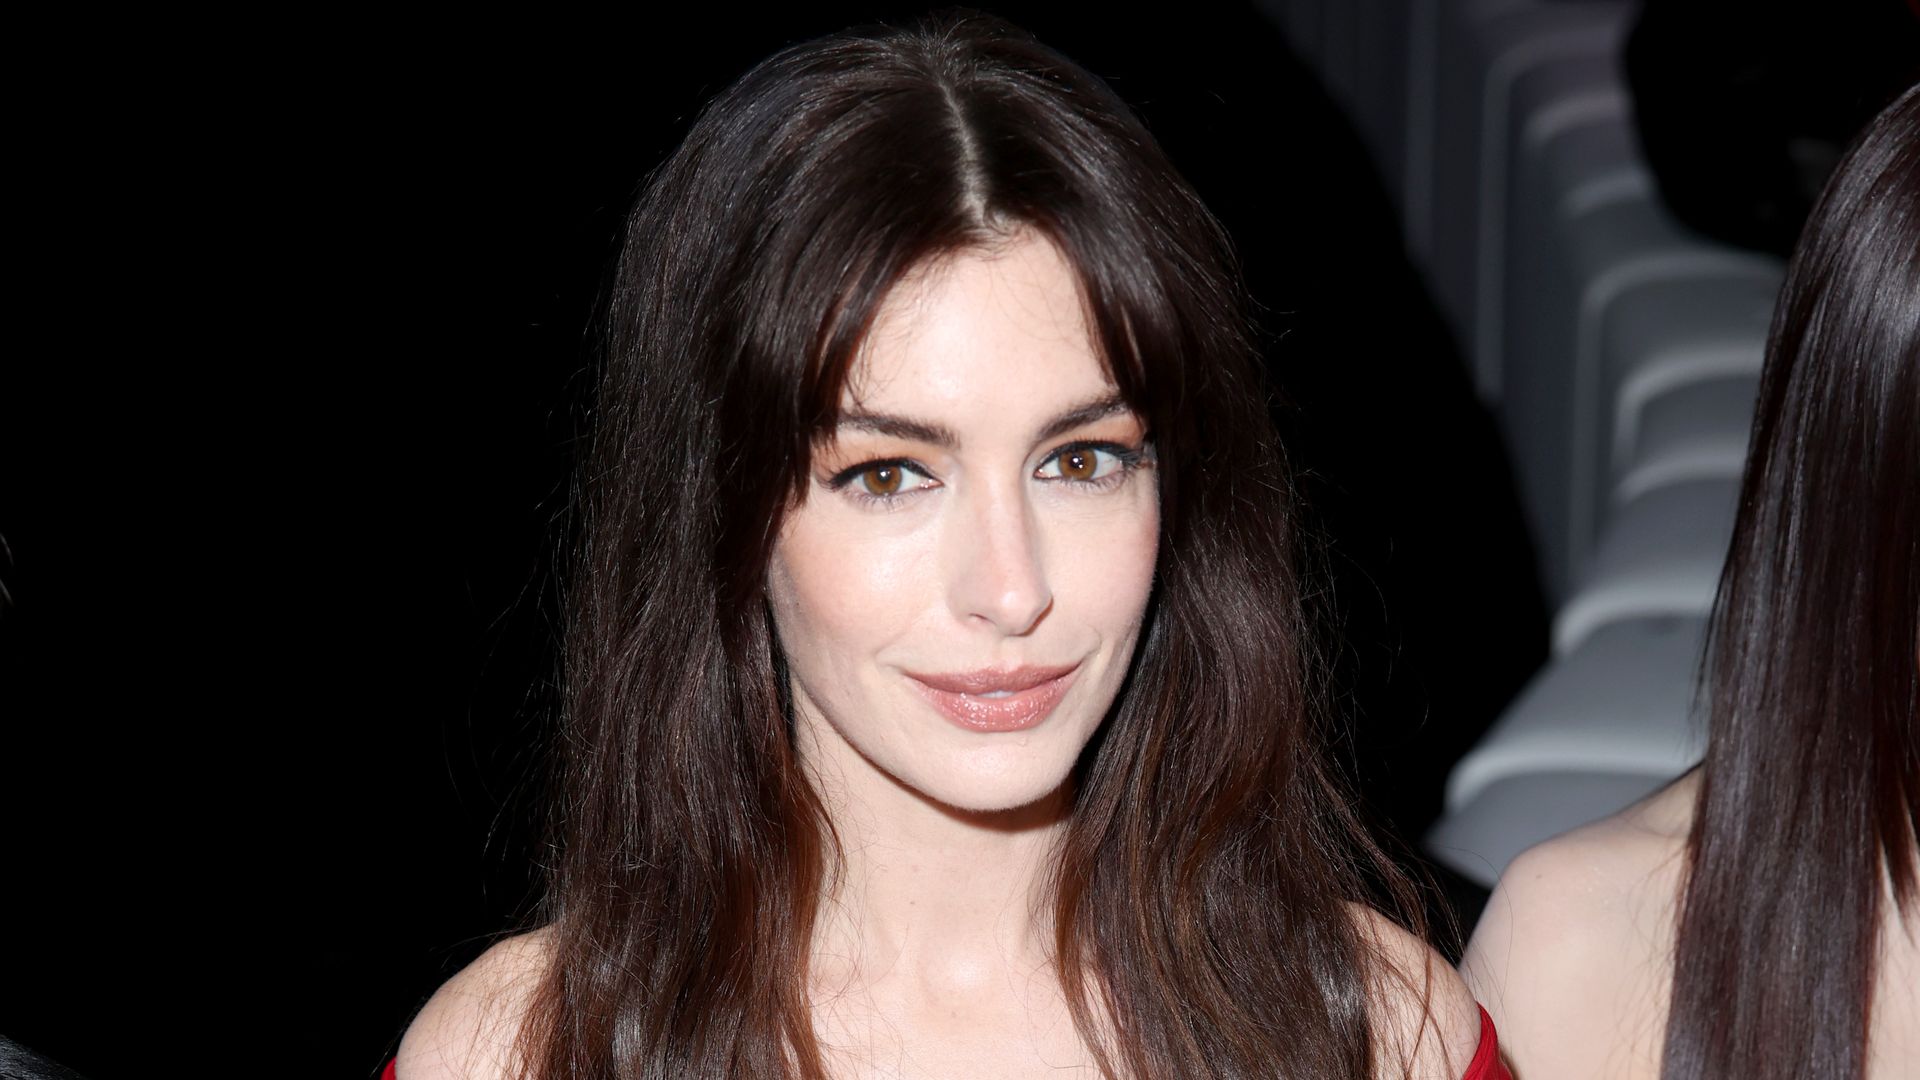 Anne Hathaway is unrecognisable in major bleach blonde hair throwback